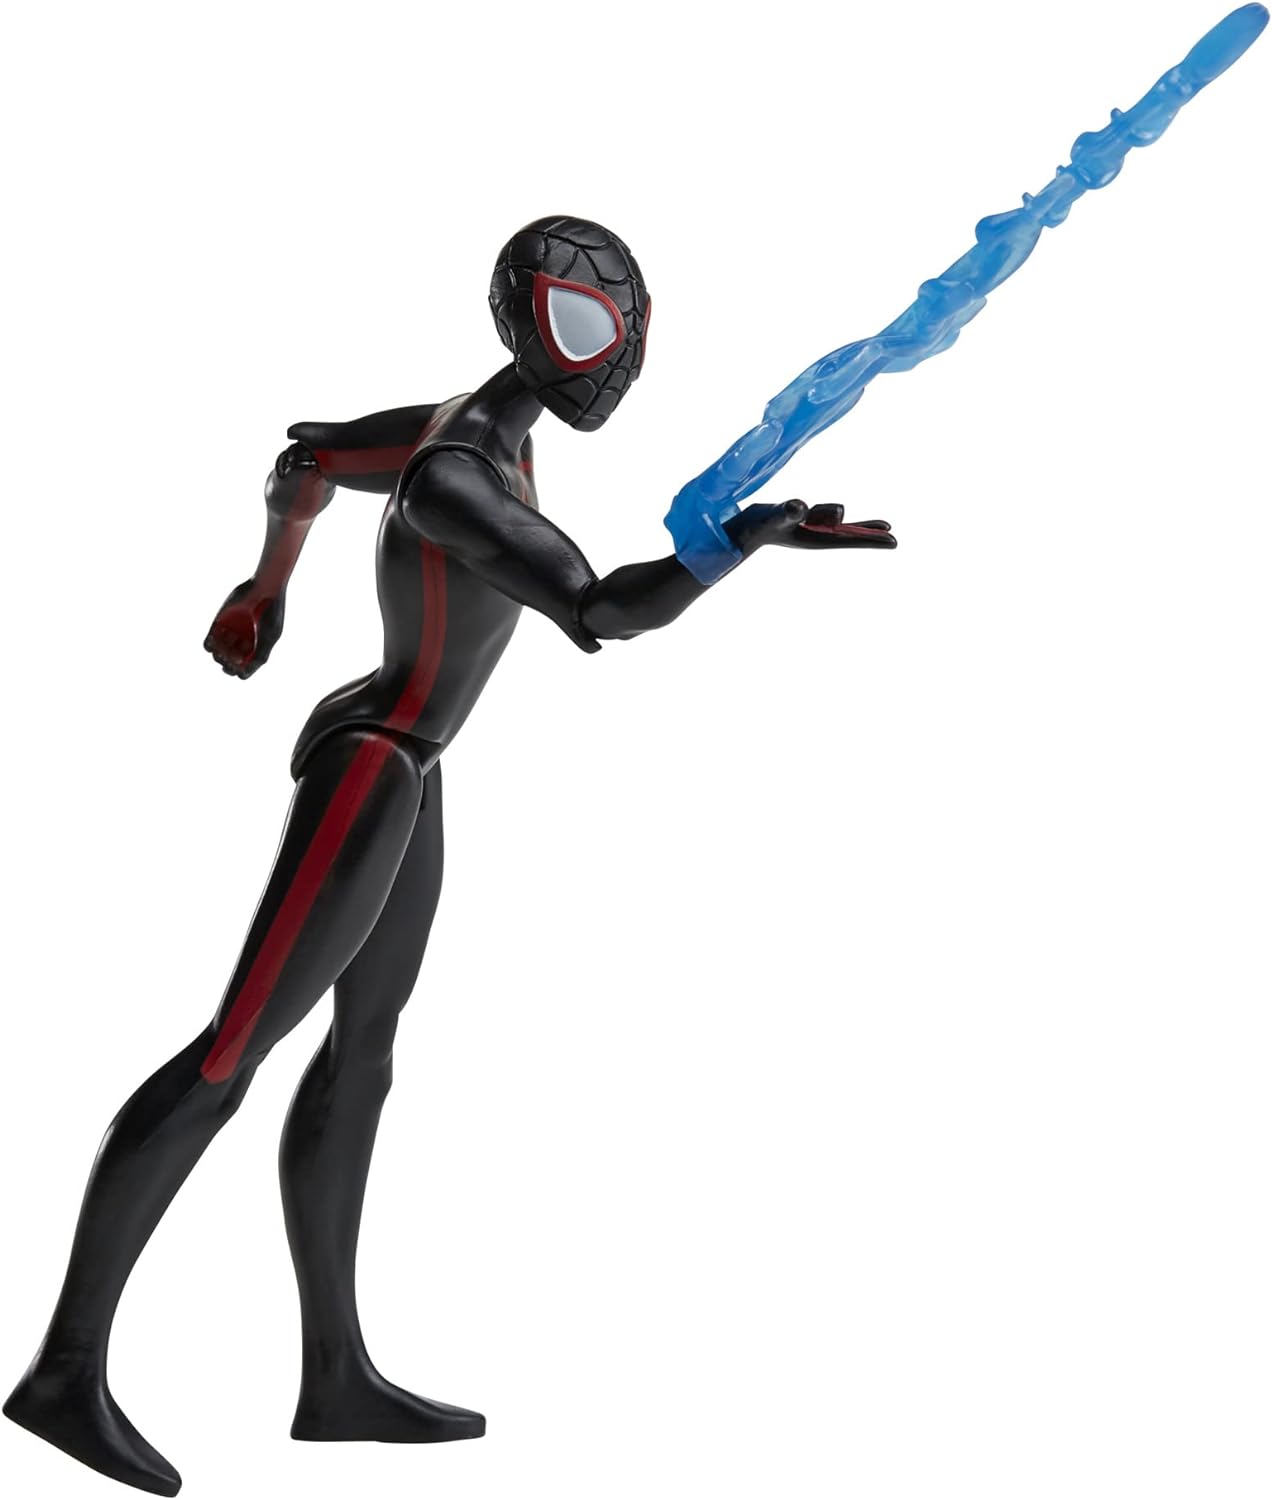 Marvel Spider-Man: Across the Spider-Verse - Miles Morales